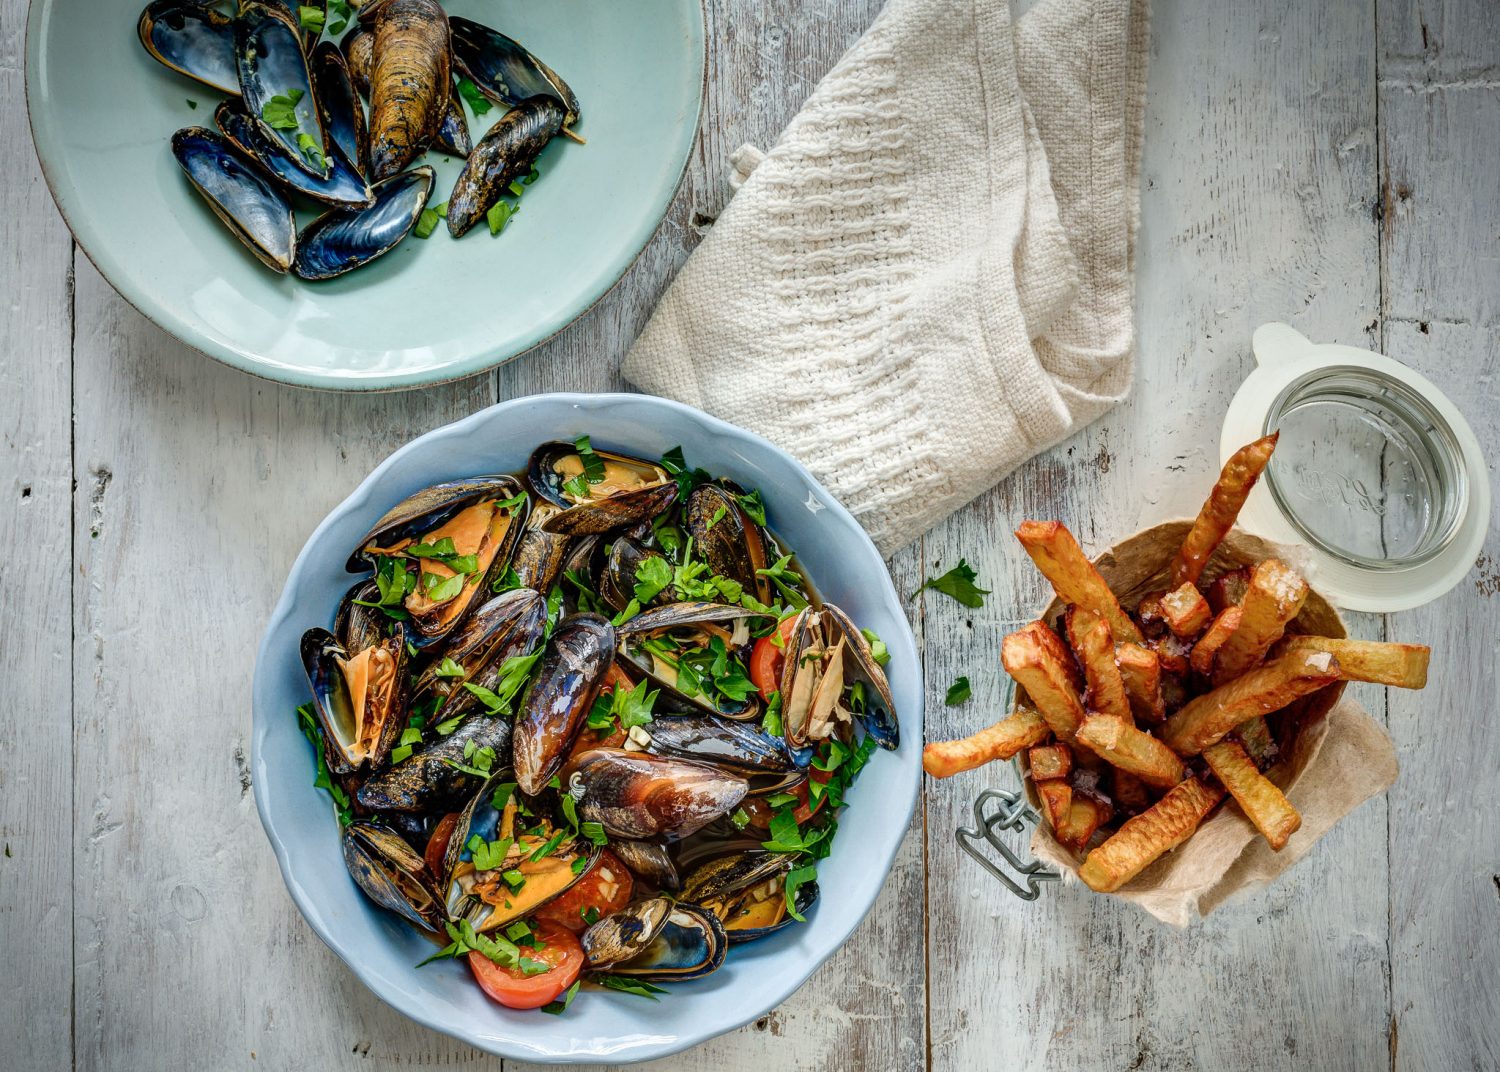 Slow Cooked Mussels and chips